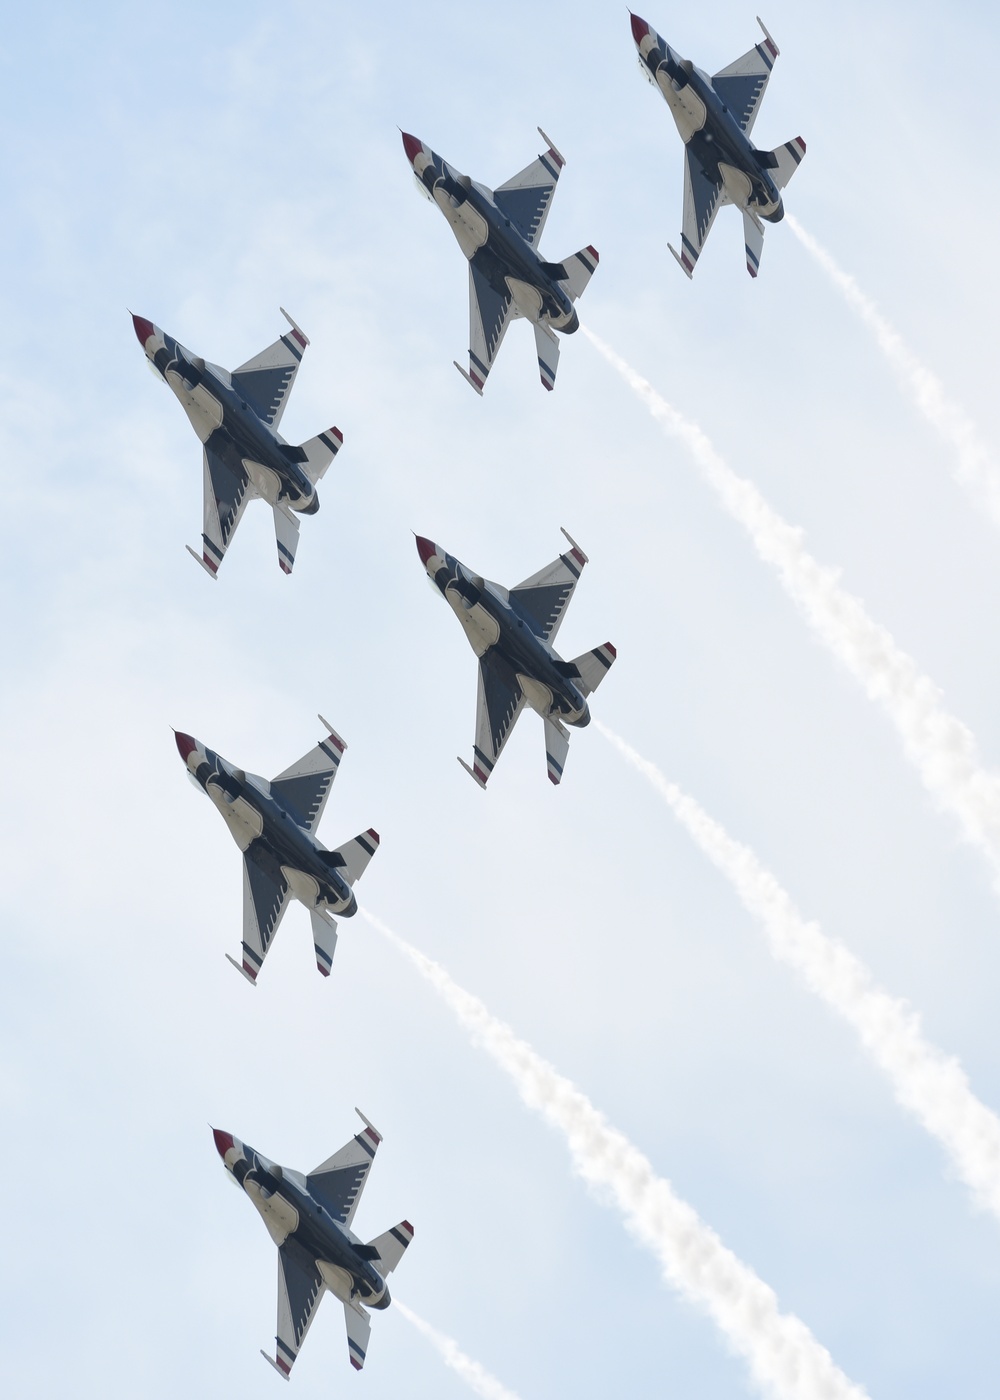 Northern Neighbors Day Air and Space Show 2018